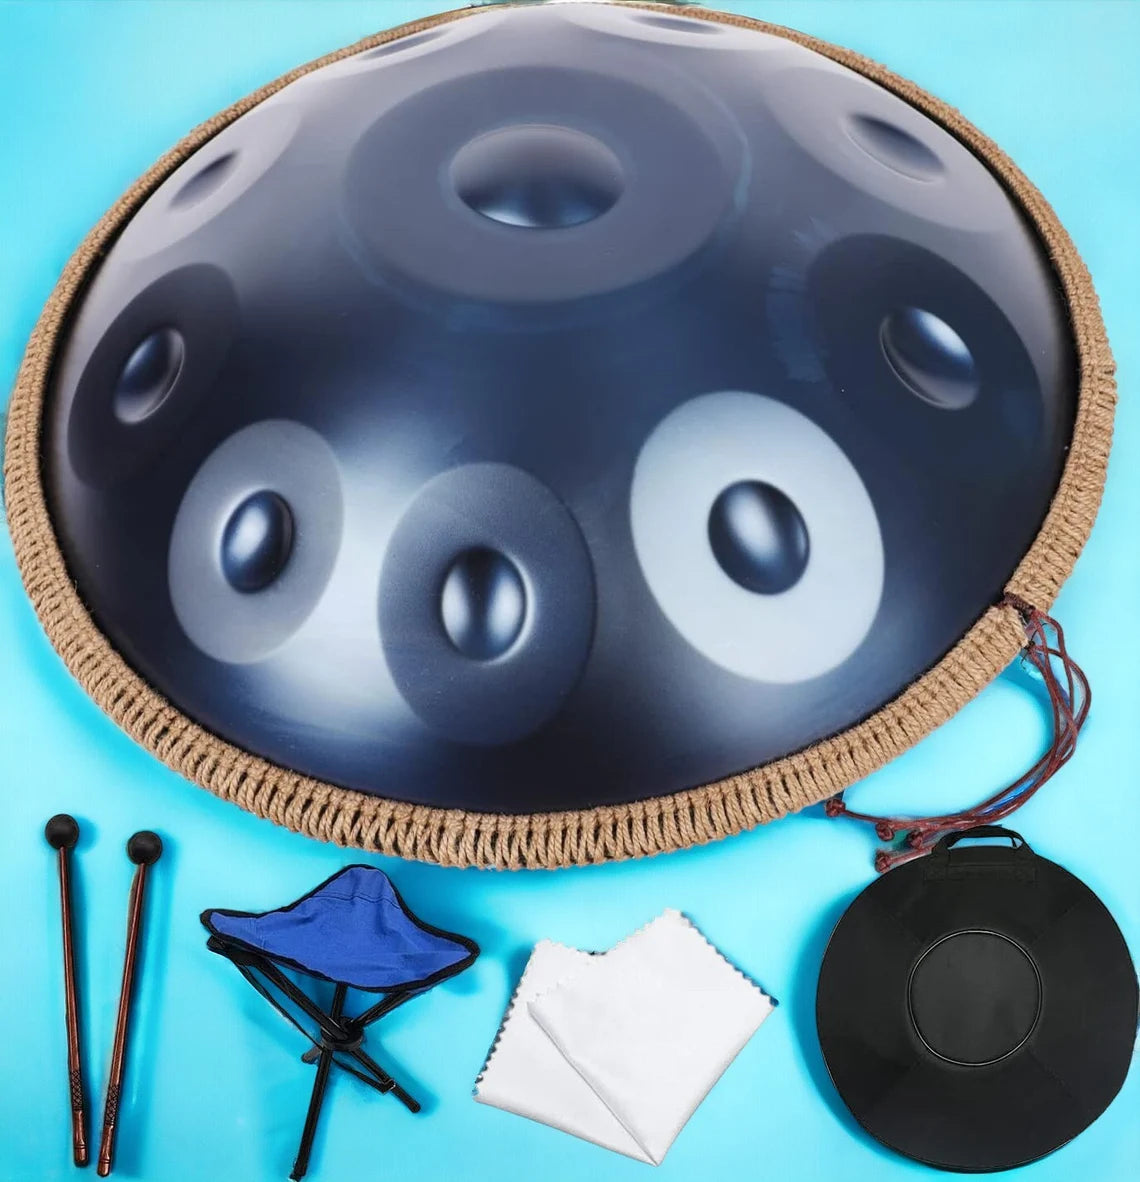 22-inch Blue Handpan Drum in D Kurd Minor - Premium Stainless Steel Percussion Instrument with Carry Bag - Perfect for All Level Musicians